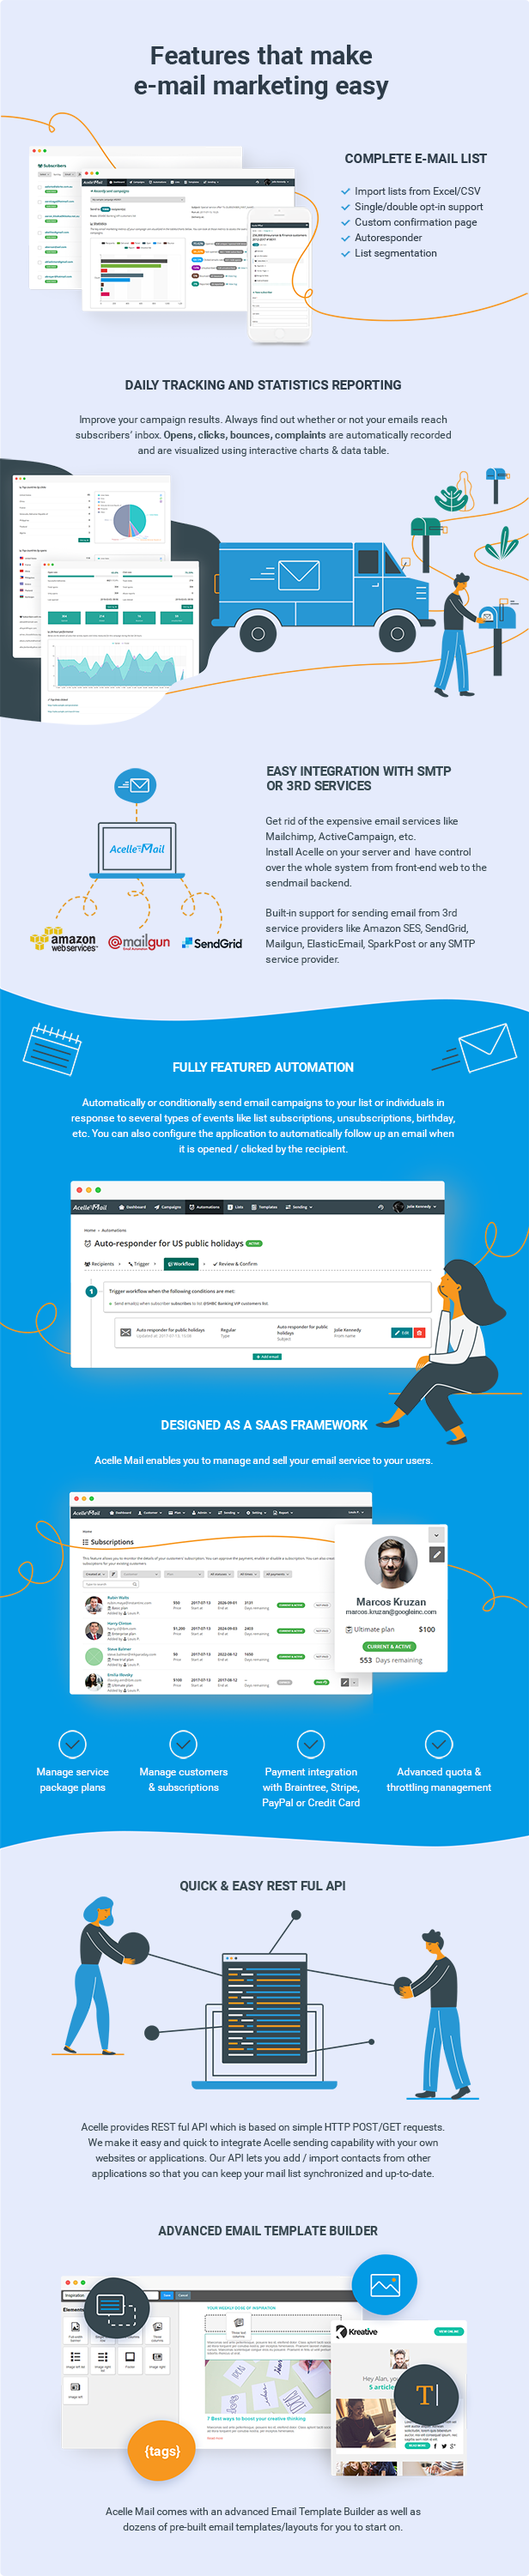 Acelle - Email Marketing Web Application - 7